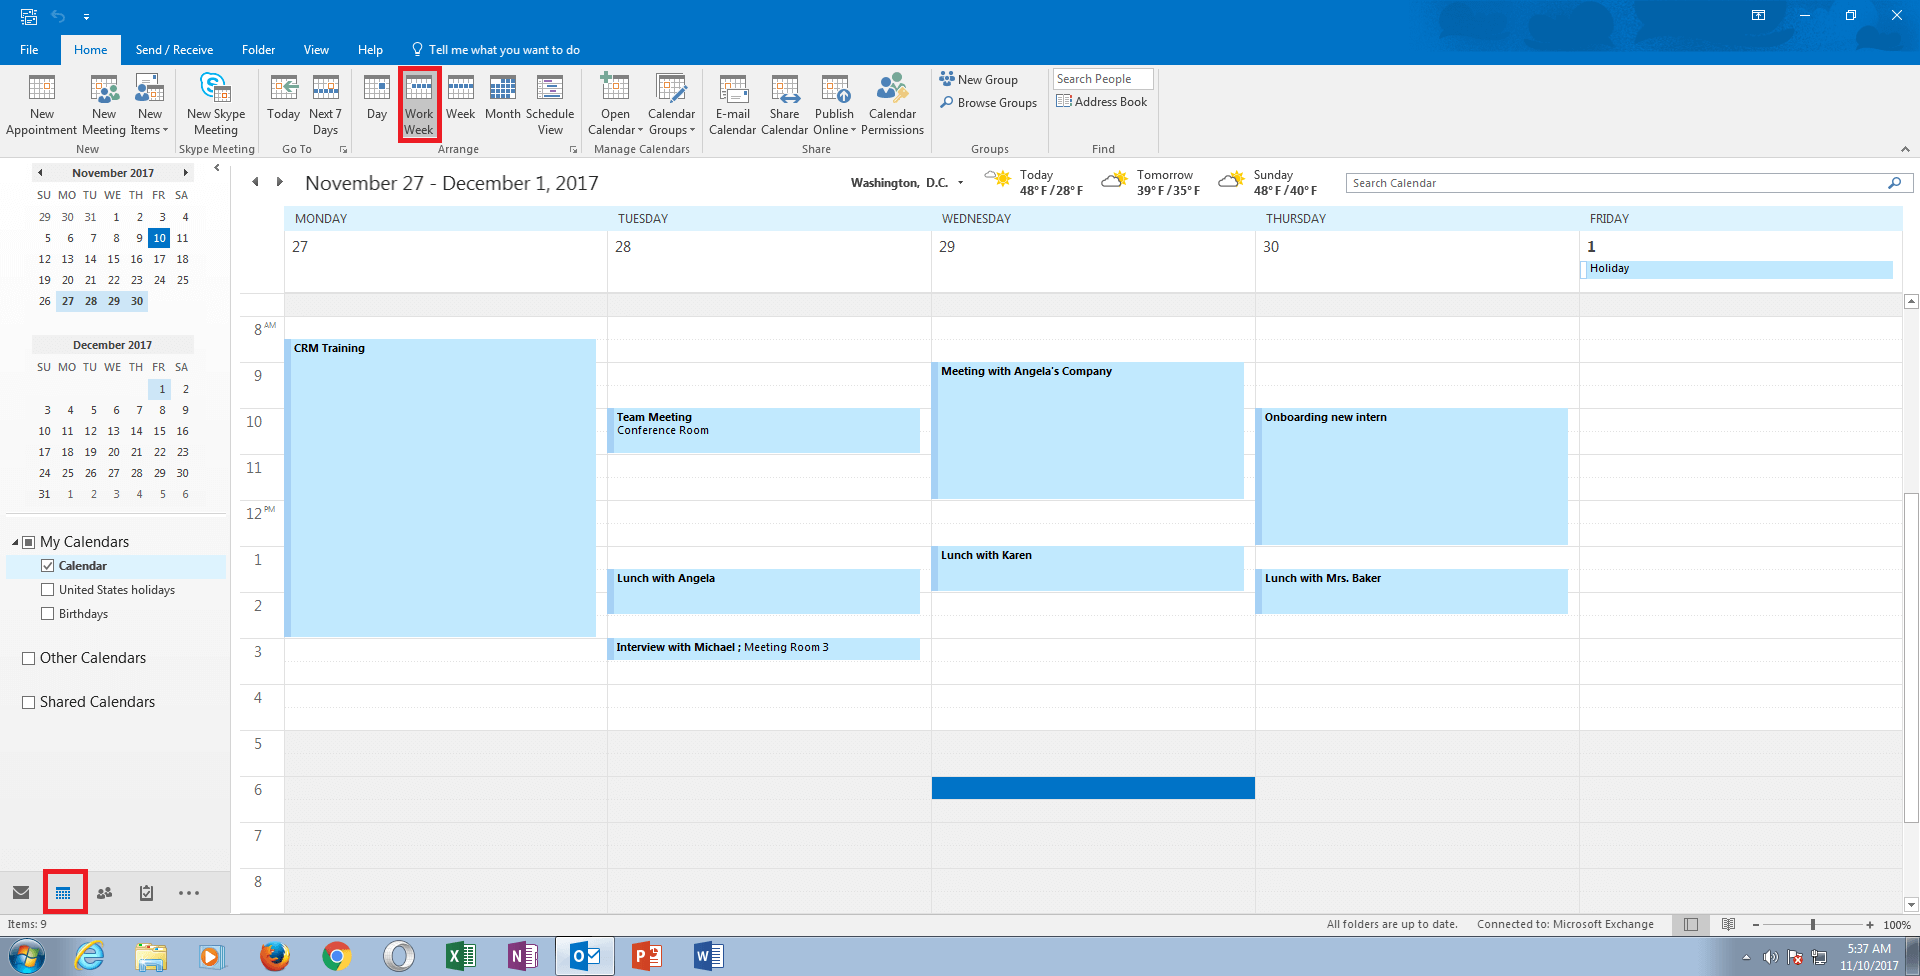 Outlook: Calendar view for one working week